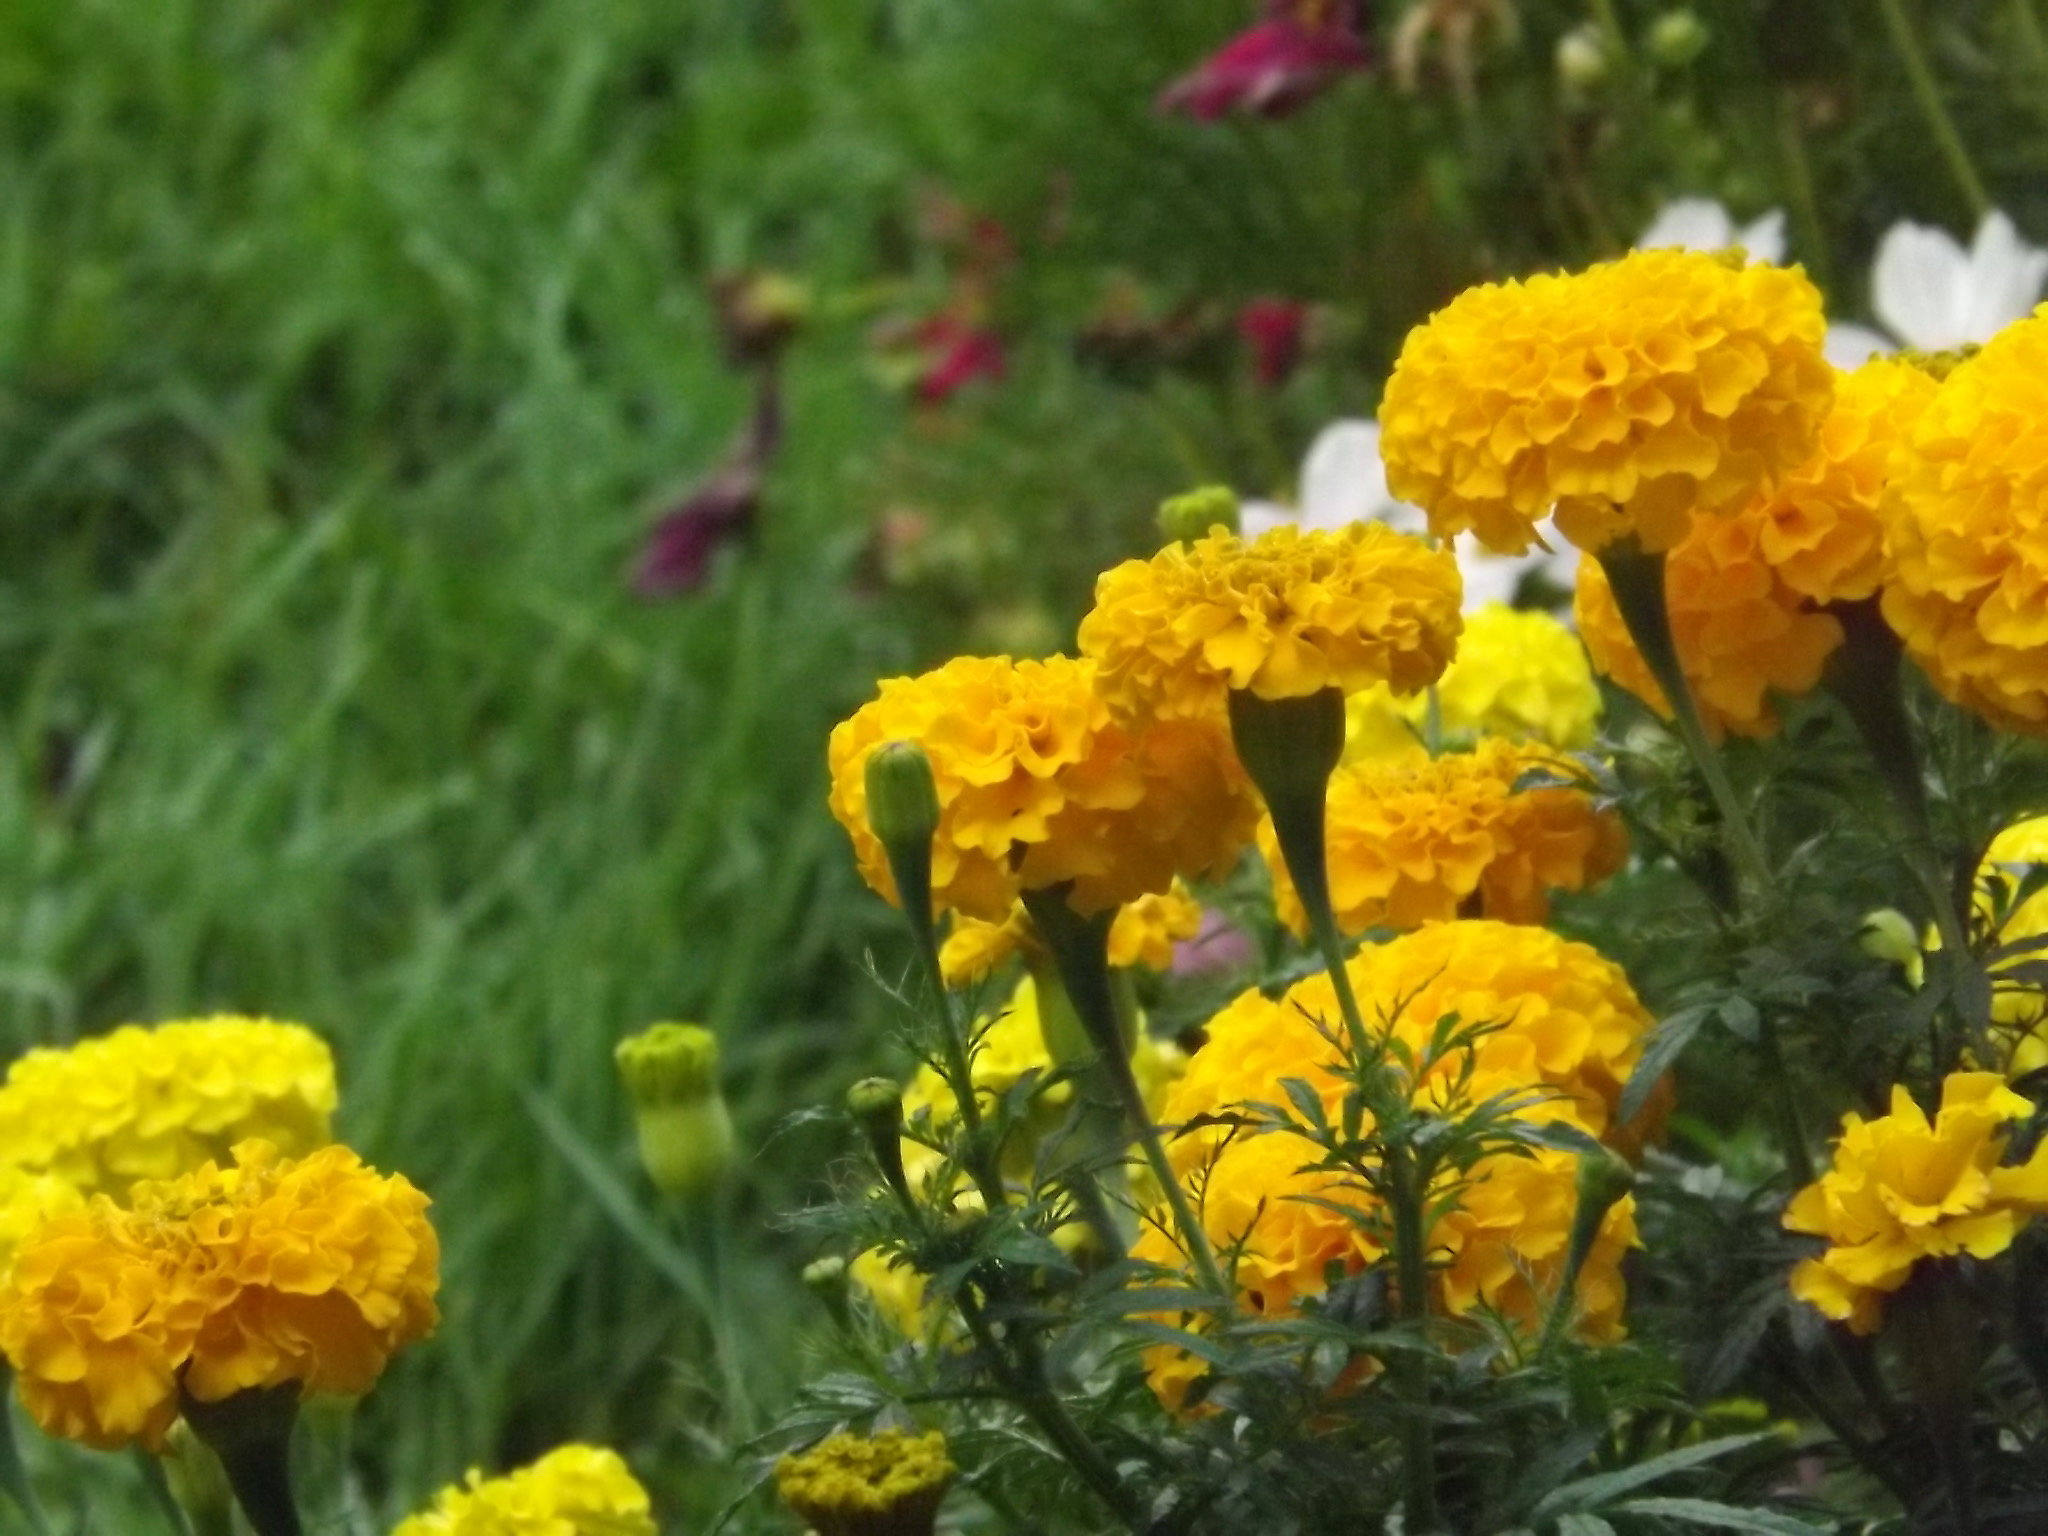 Giant Marigolds, yellow, and Cosmos, White